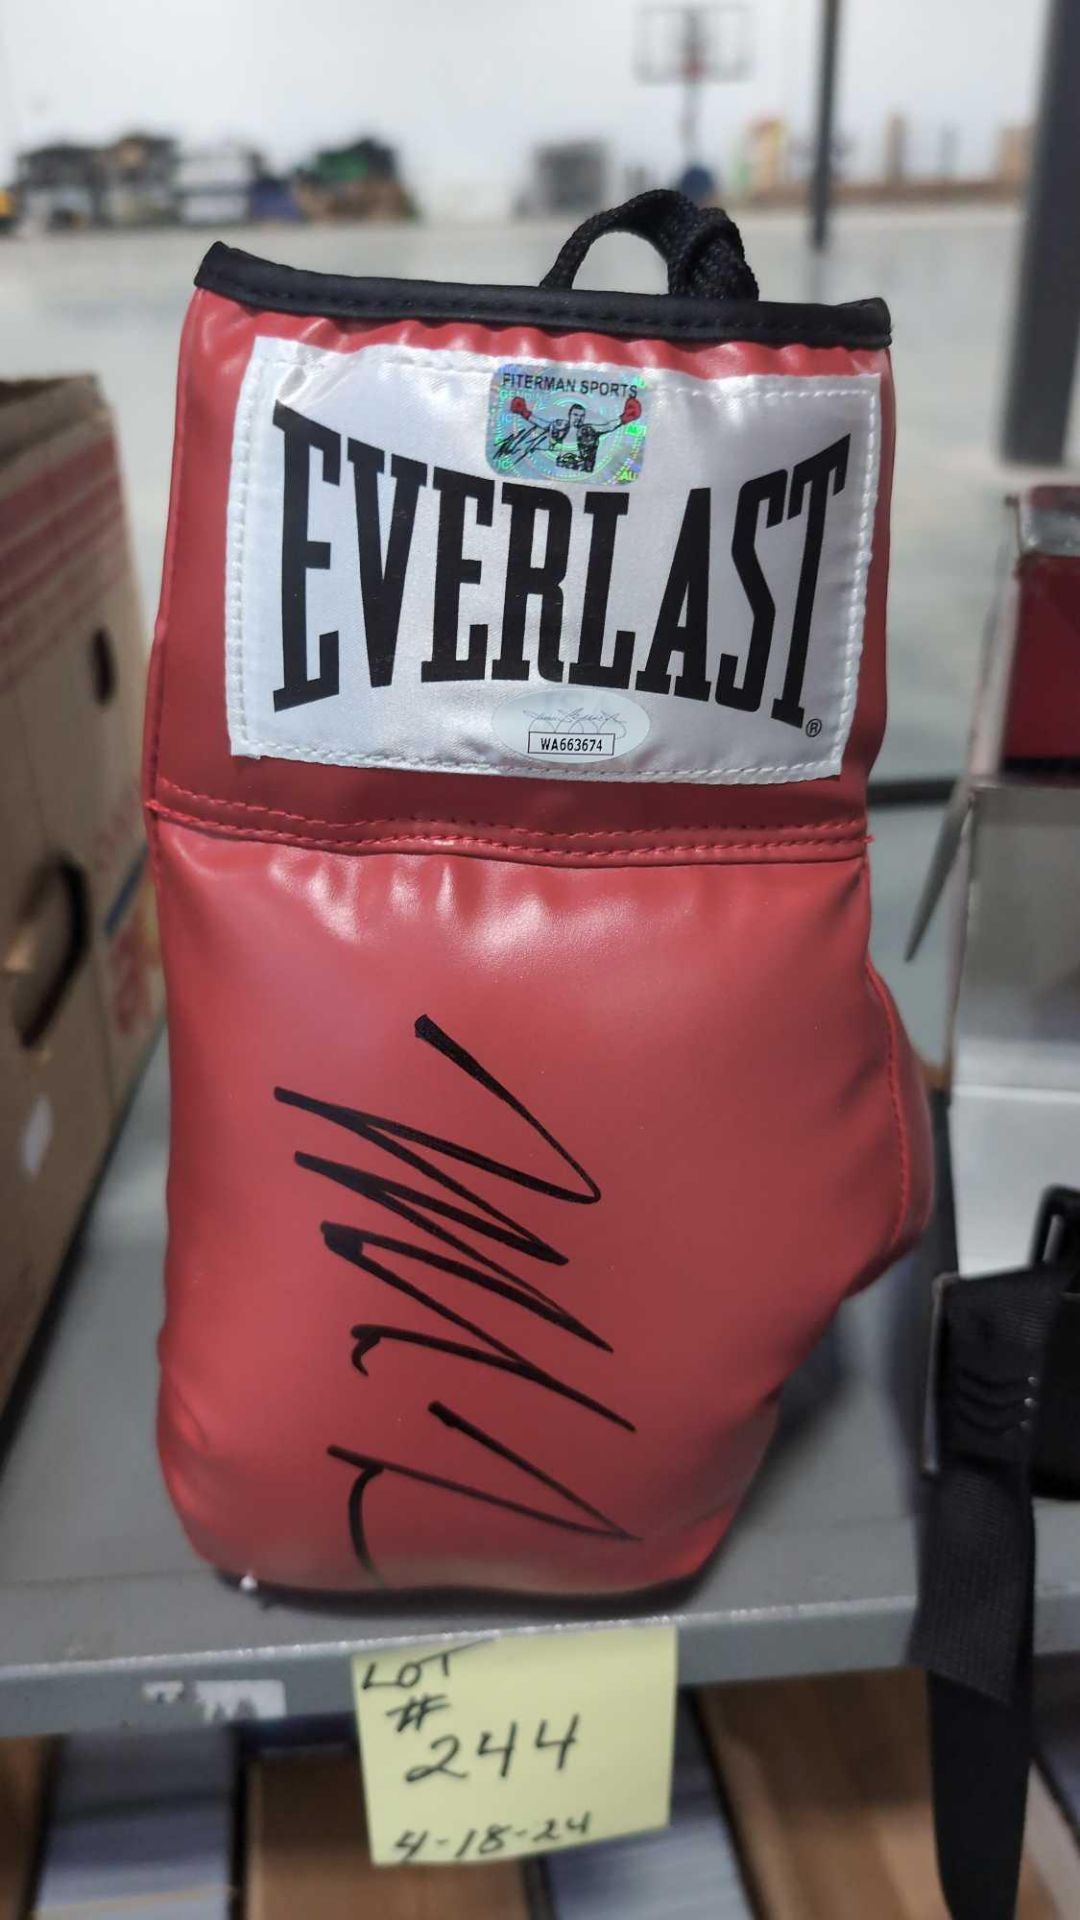 Mike Tyson signed Everlast glove authenticated by JSA - Image 2 of 3